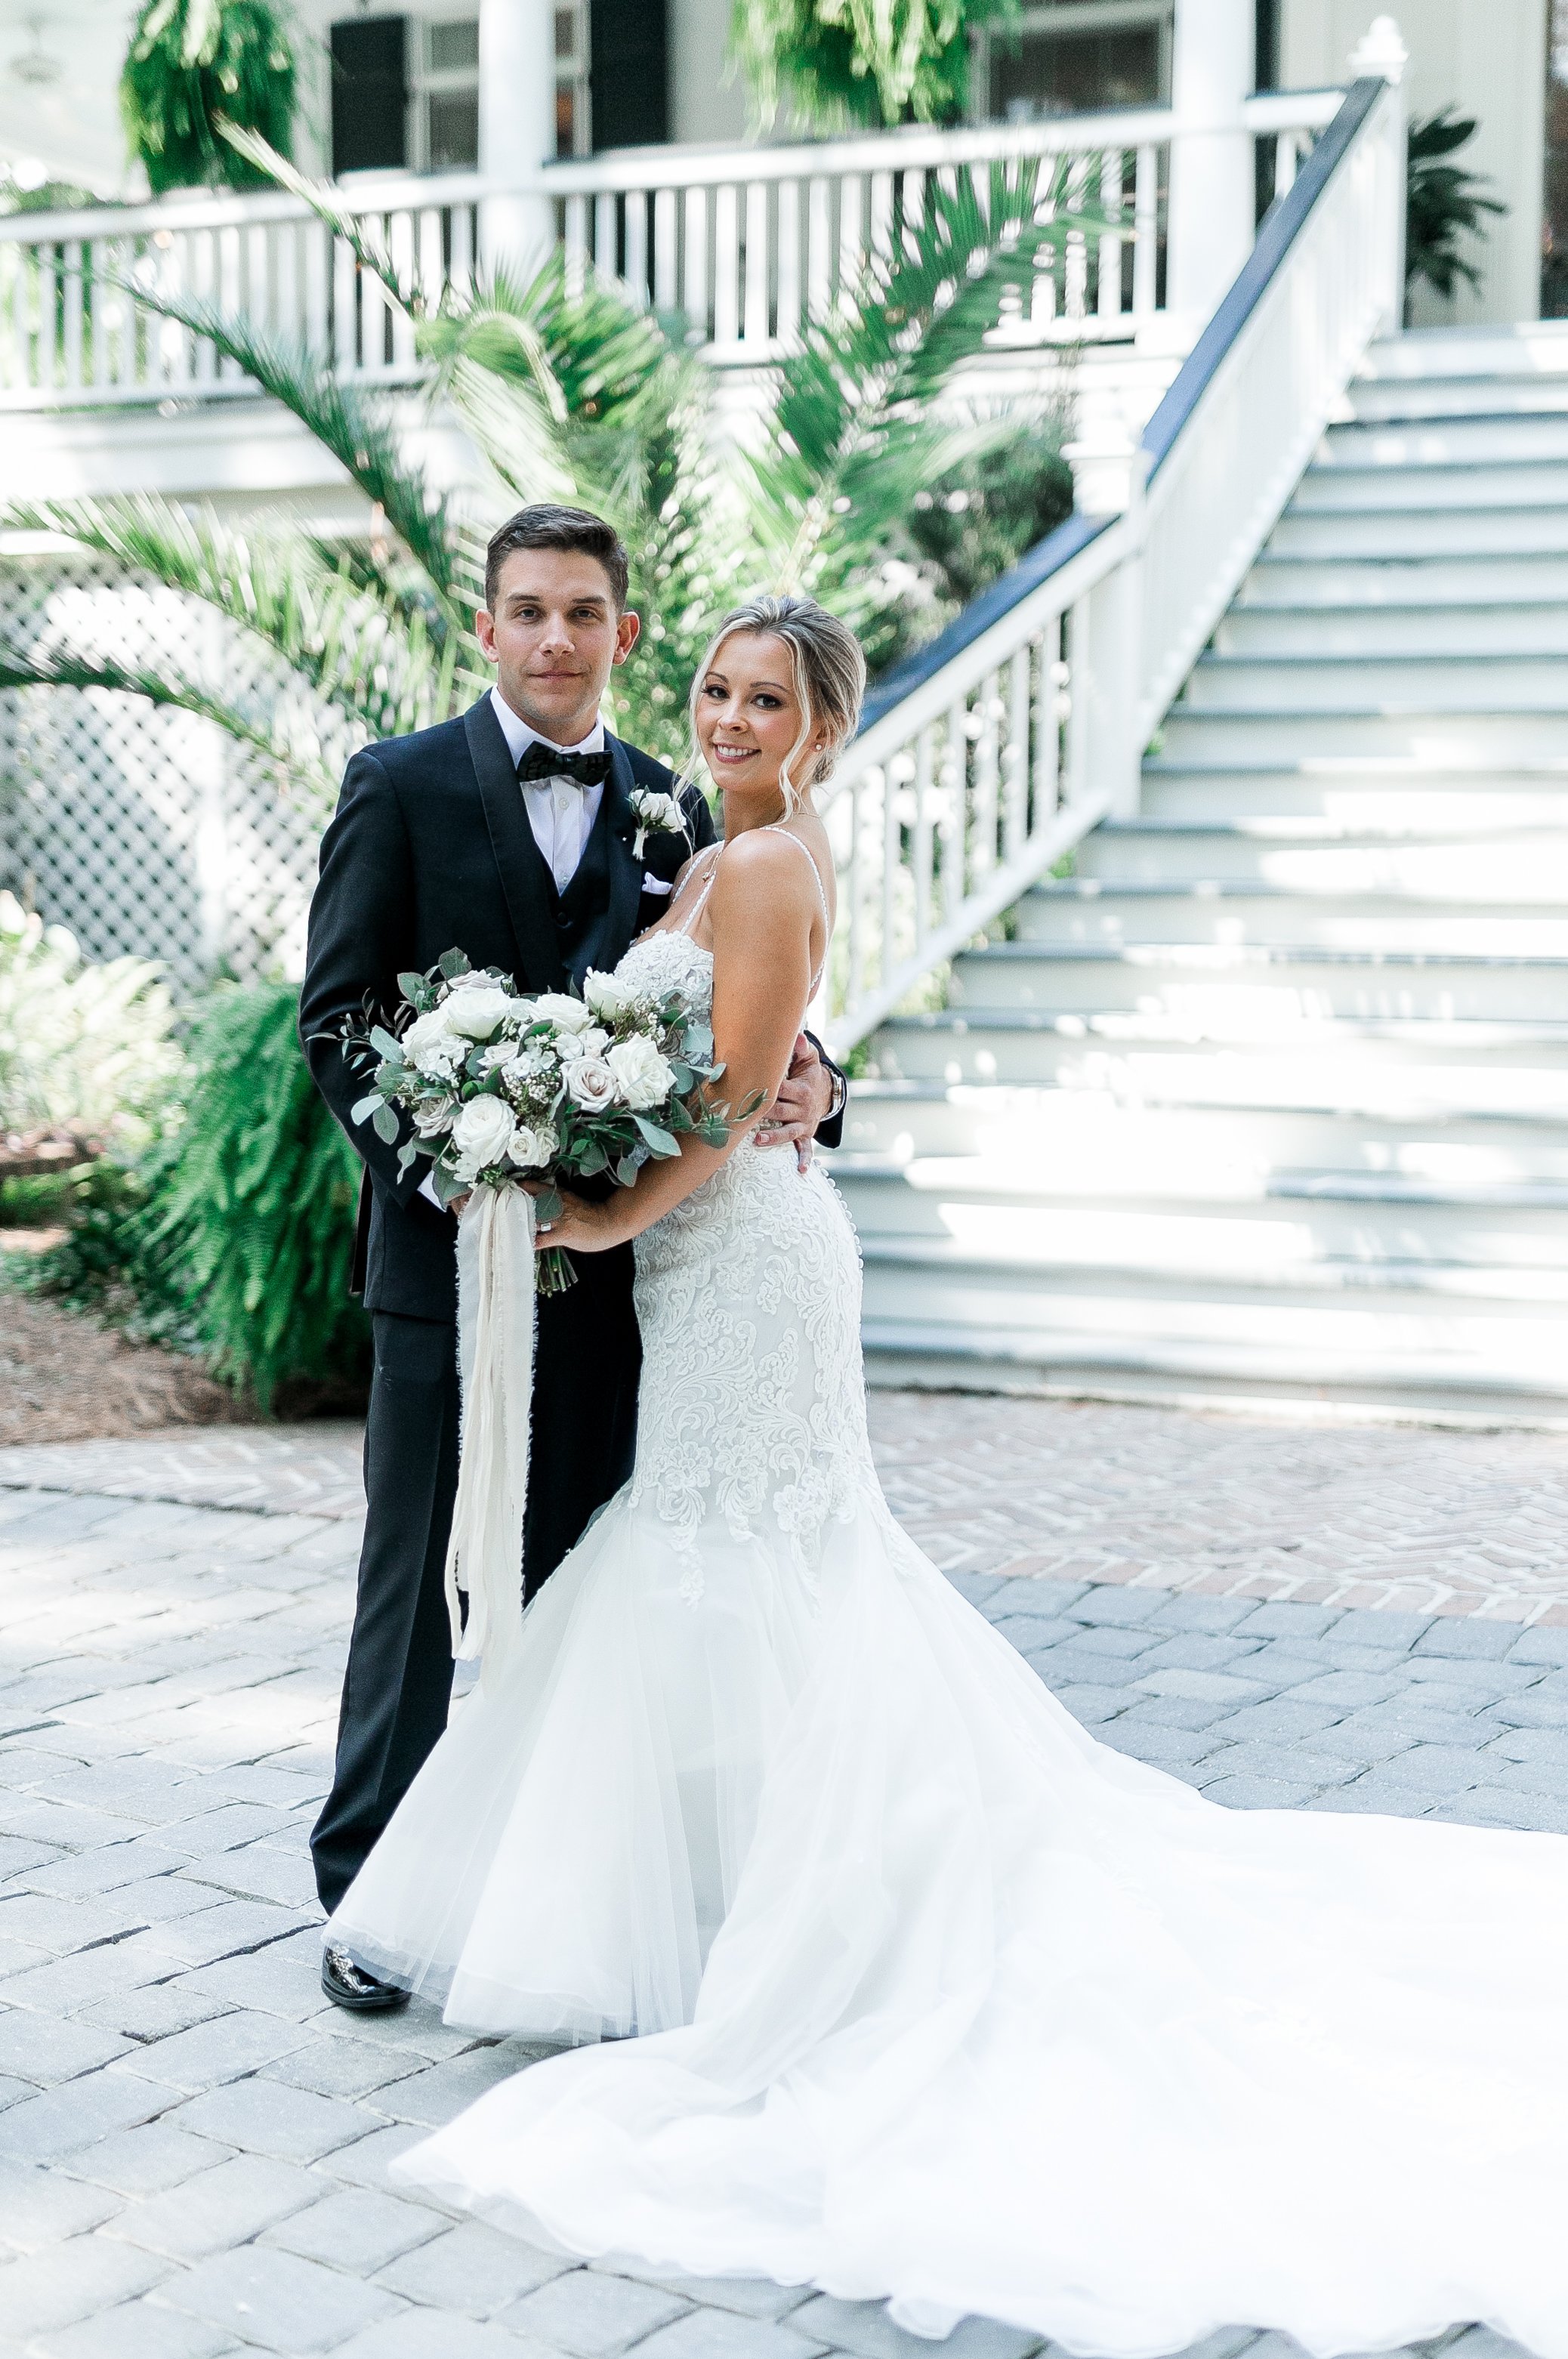 ivory-and-beau-bride-and-florals-wedding-blog-real-bride-real-wedding-savannah-wedding-southern-wedding-mackey-house-alistaire-maggie-sottero-wedding-dress-organic-natural-neutral-wedding-flowers-wedding-florist-savannah-Evan+MerrittWeddingDay_-46.jpg